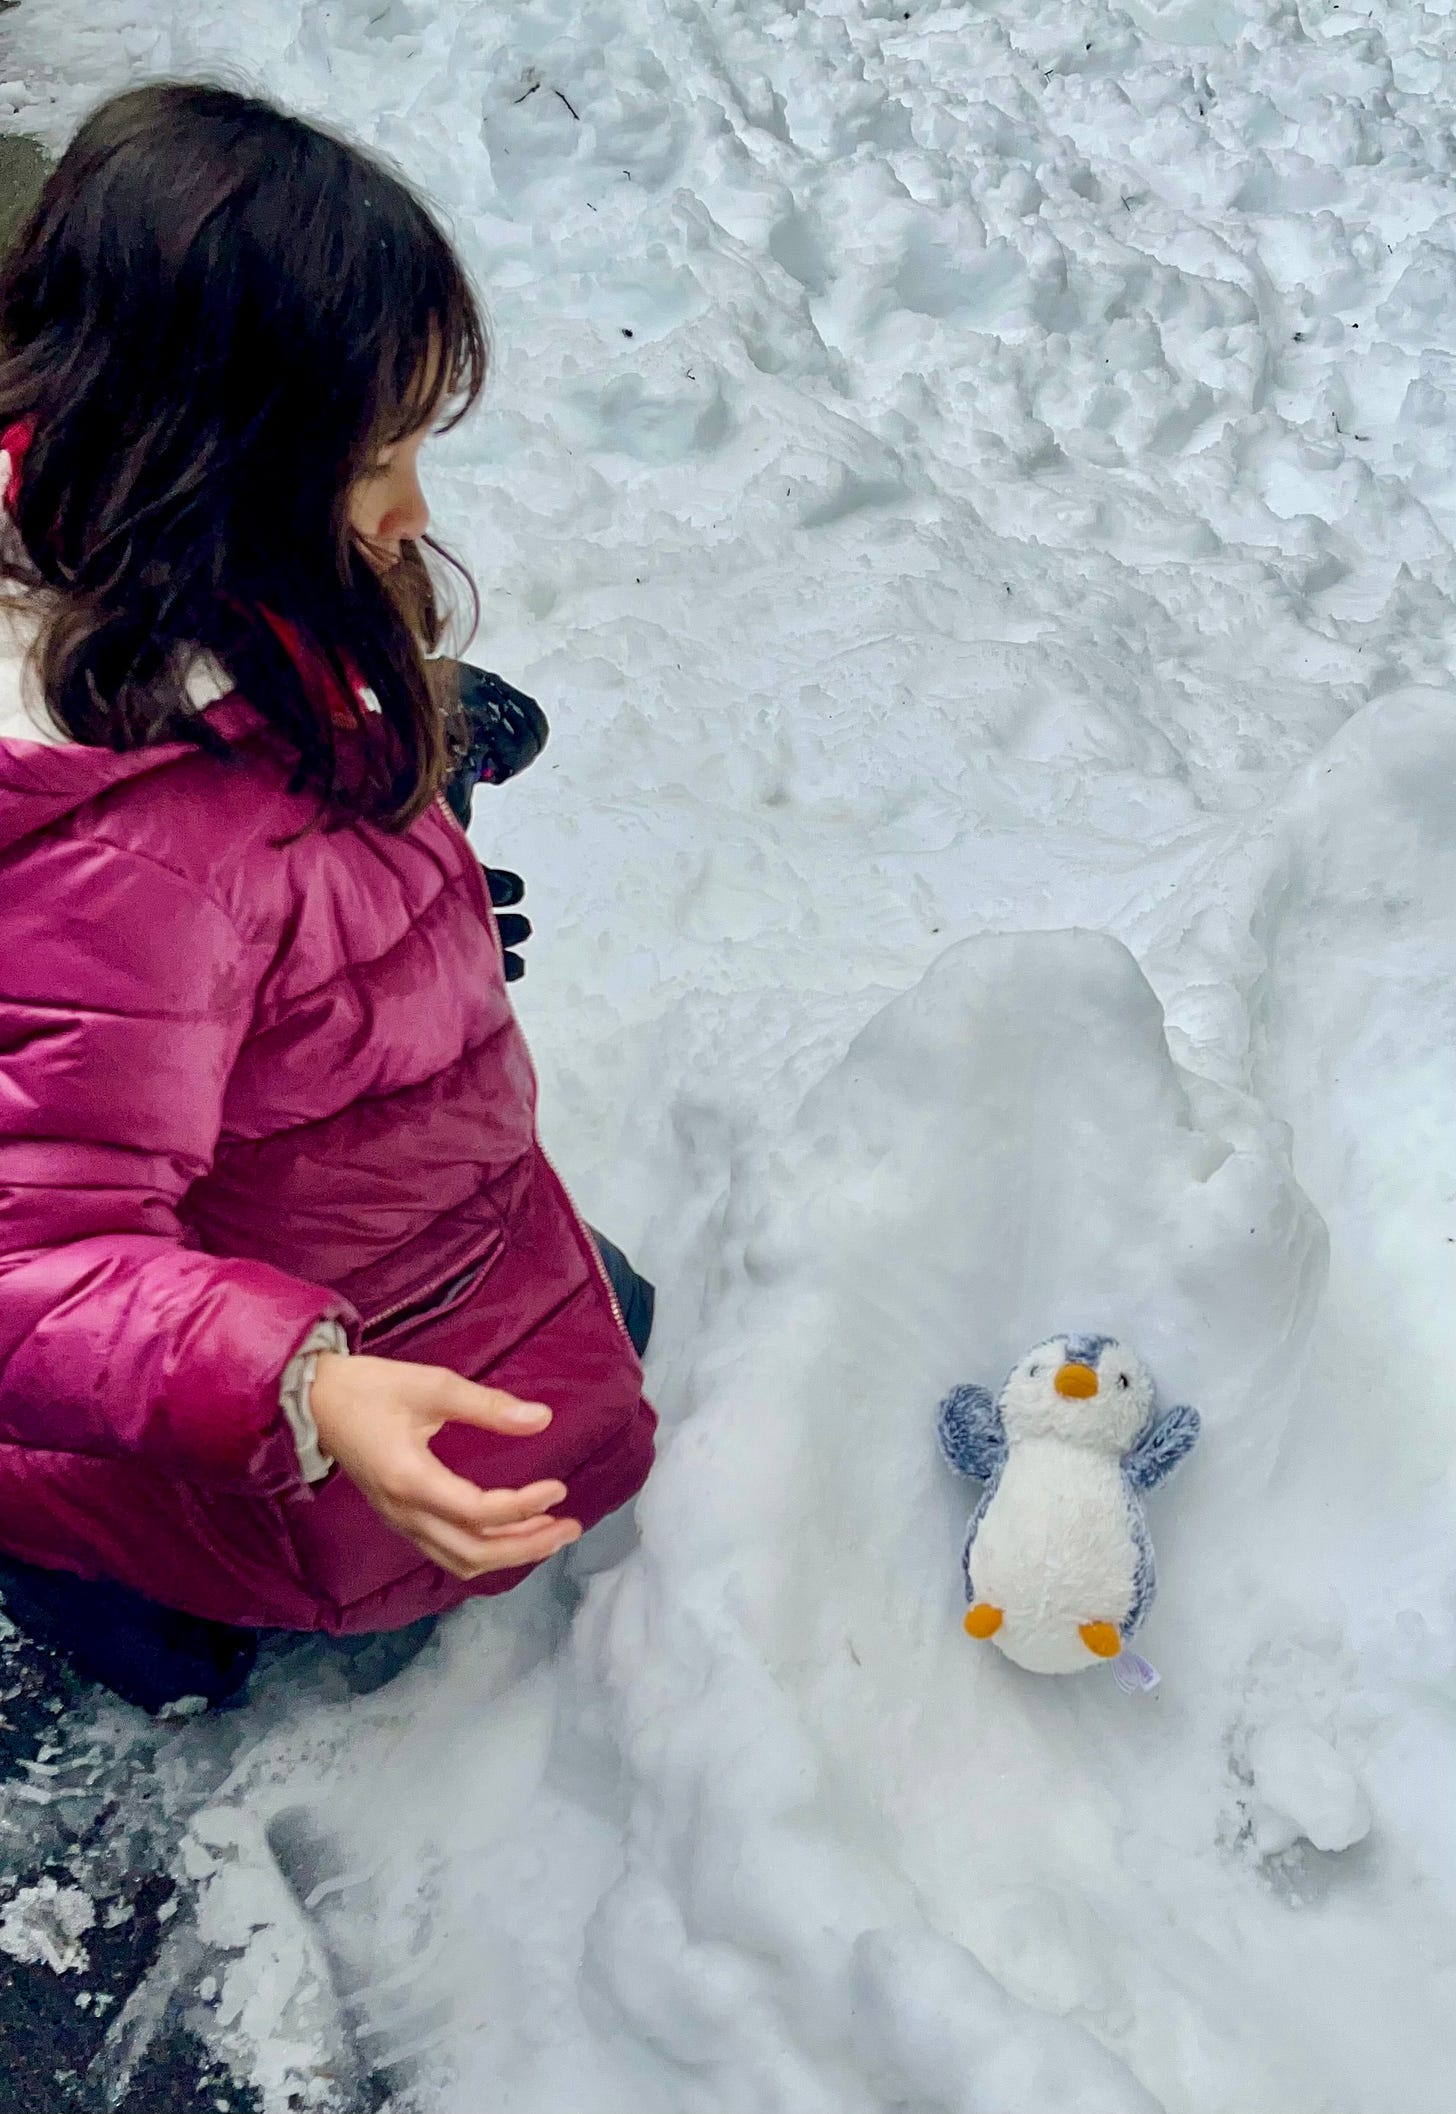 Girl sitting in snow with a stuffed penguin next to her.